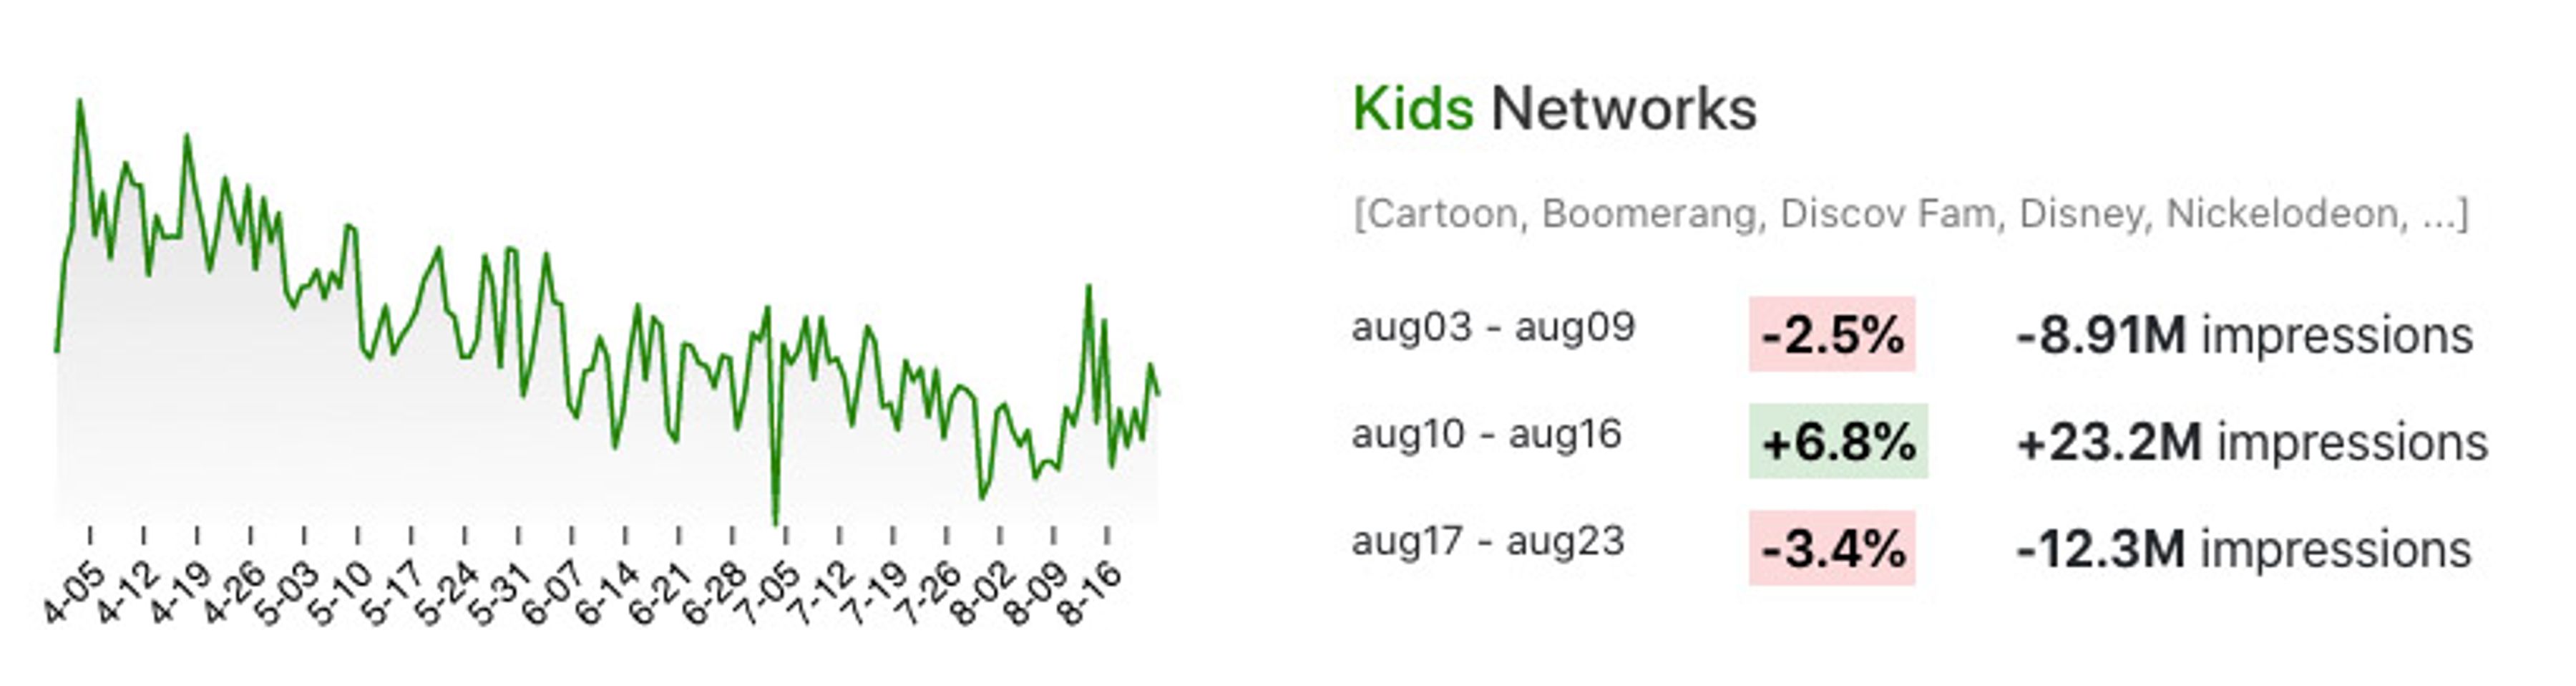 Changes in TV viewing for Kids Networks